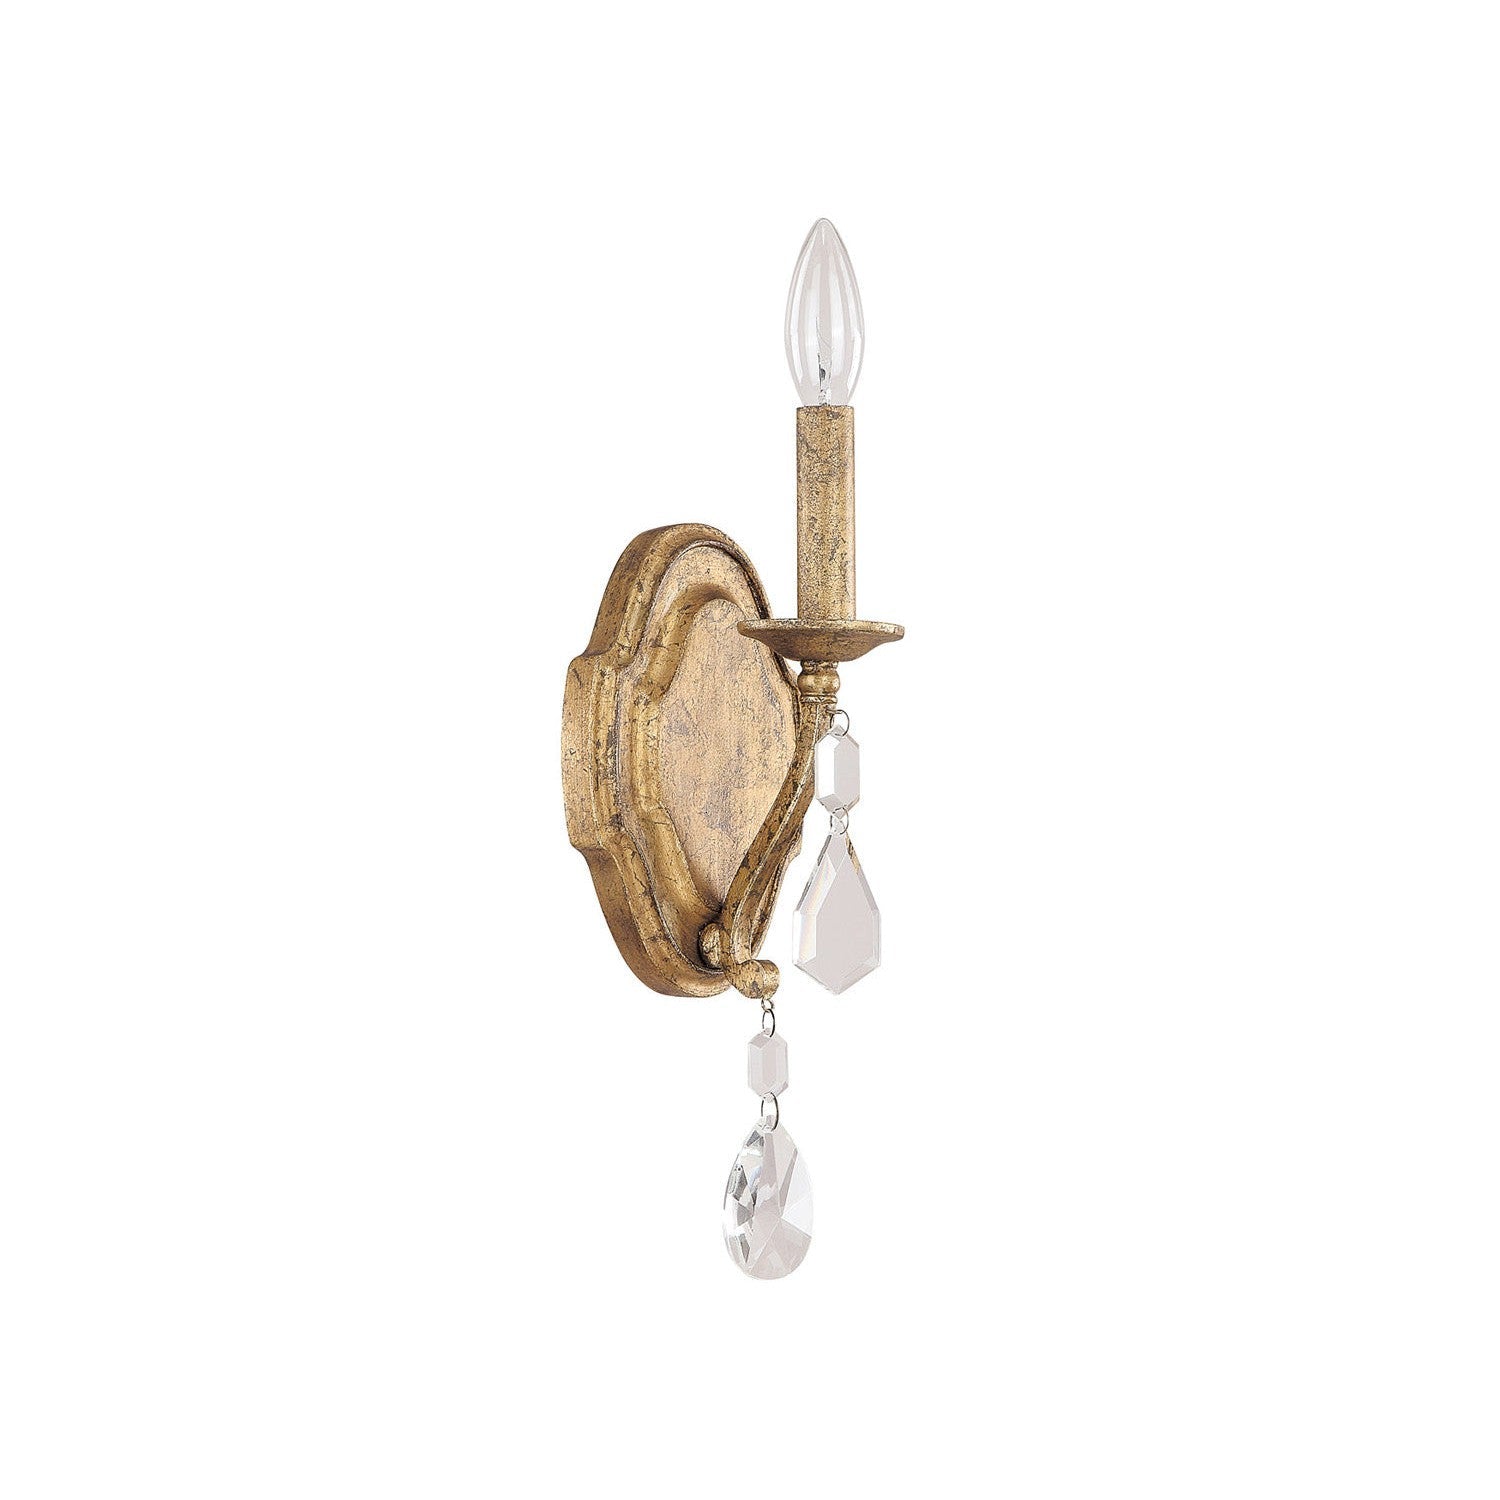 Capital Blakely 1616AG-CR Wall Sconce Light - Antique Gold